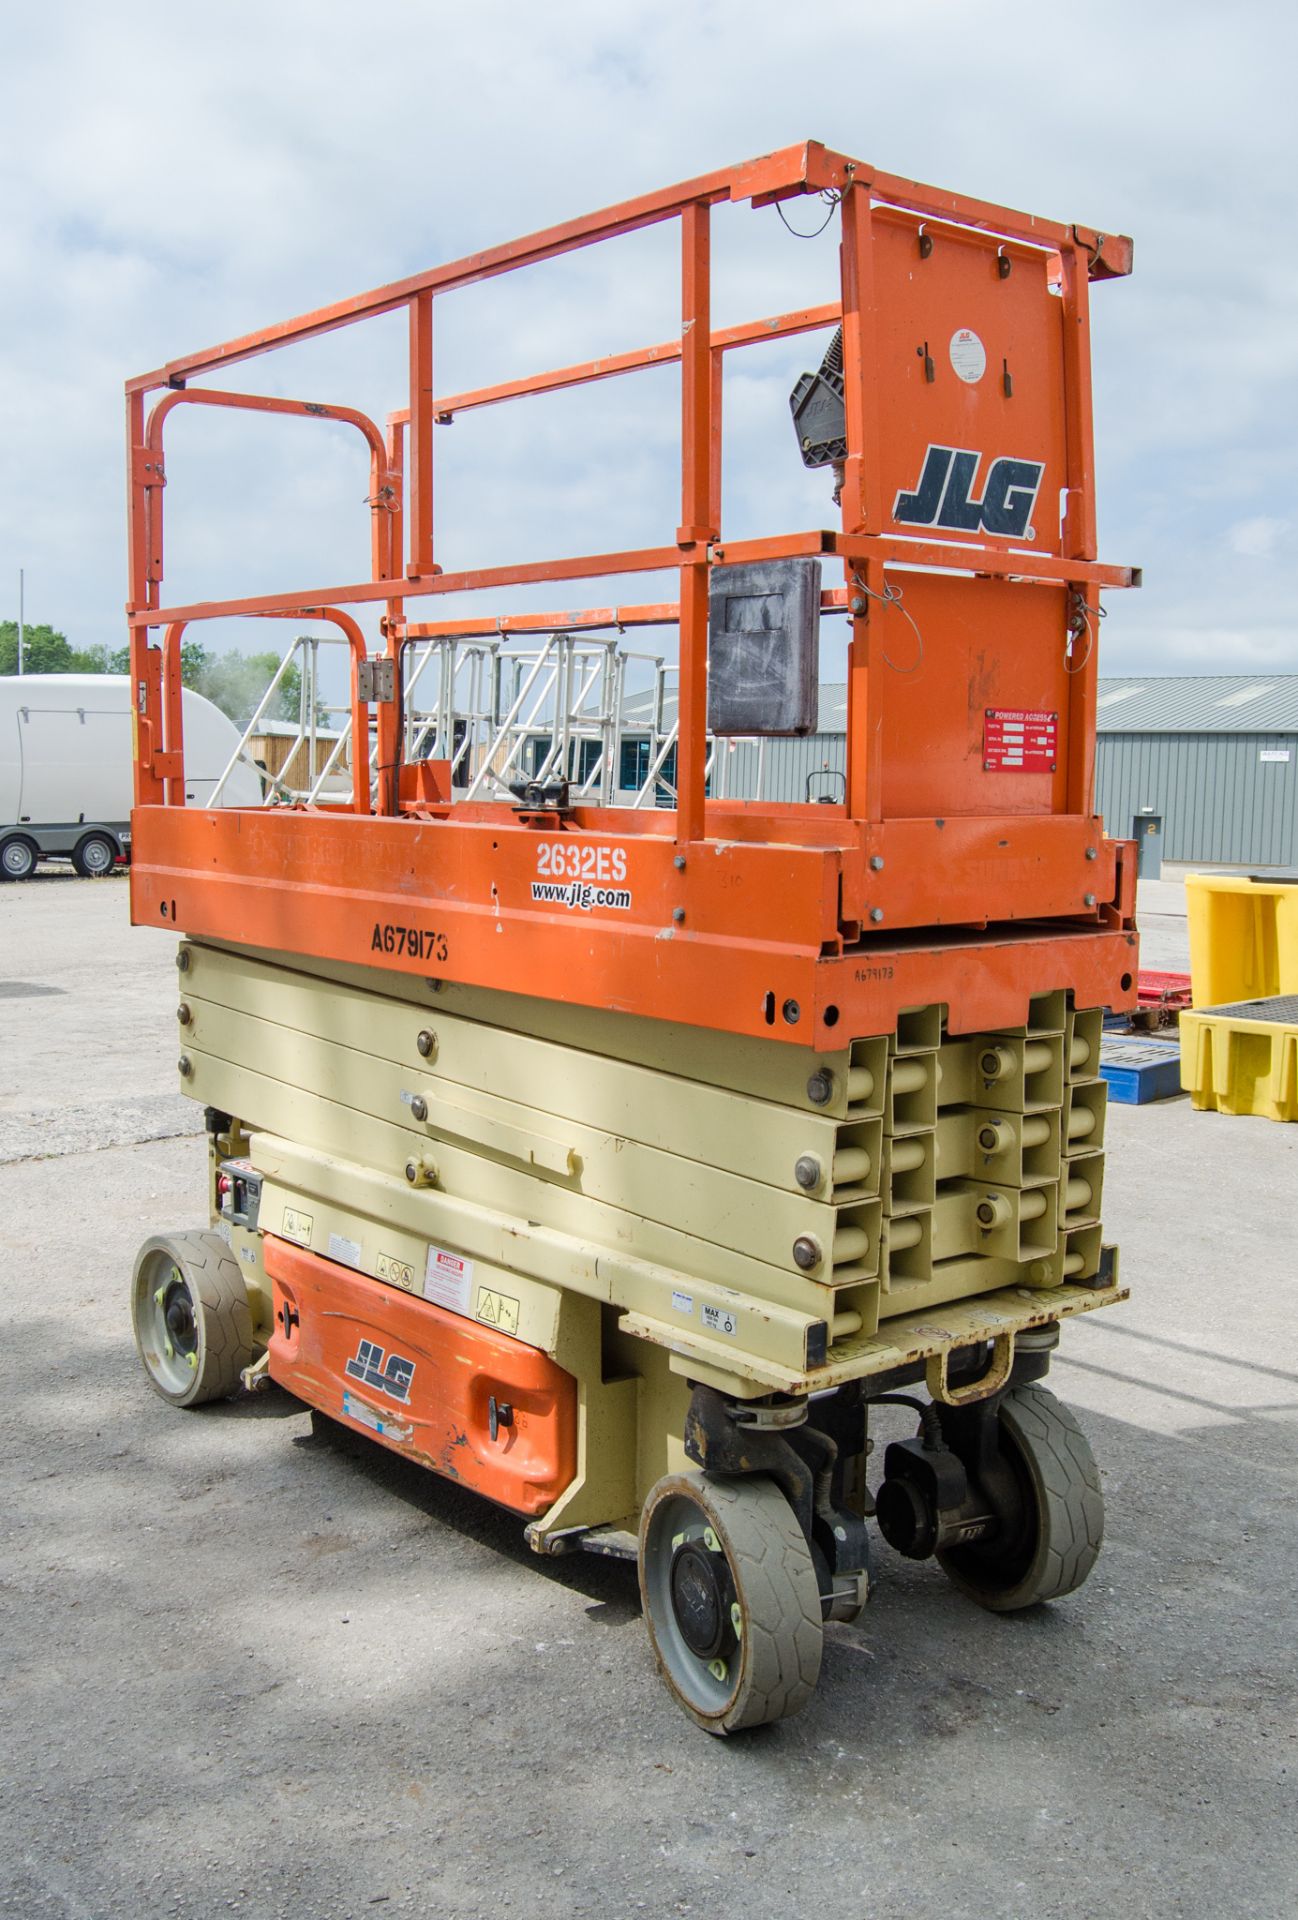 JLG 2632ES battery electric scissor lift access platform Year: 2014 S/N: 20416 Recorded Hours: 179 - Image 4 of 8